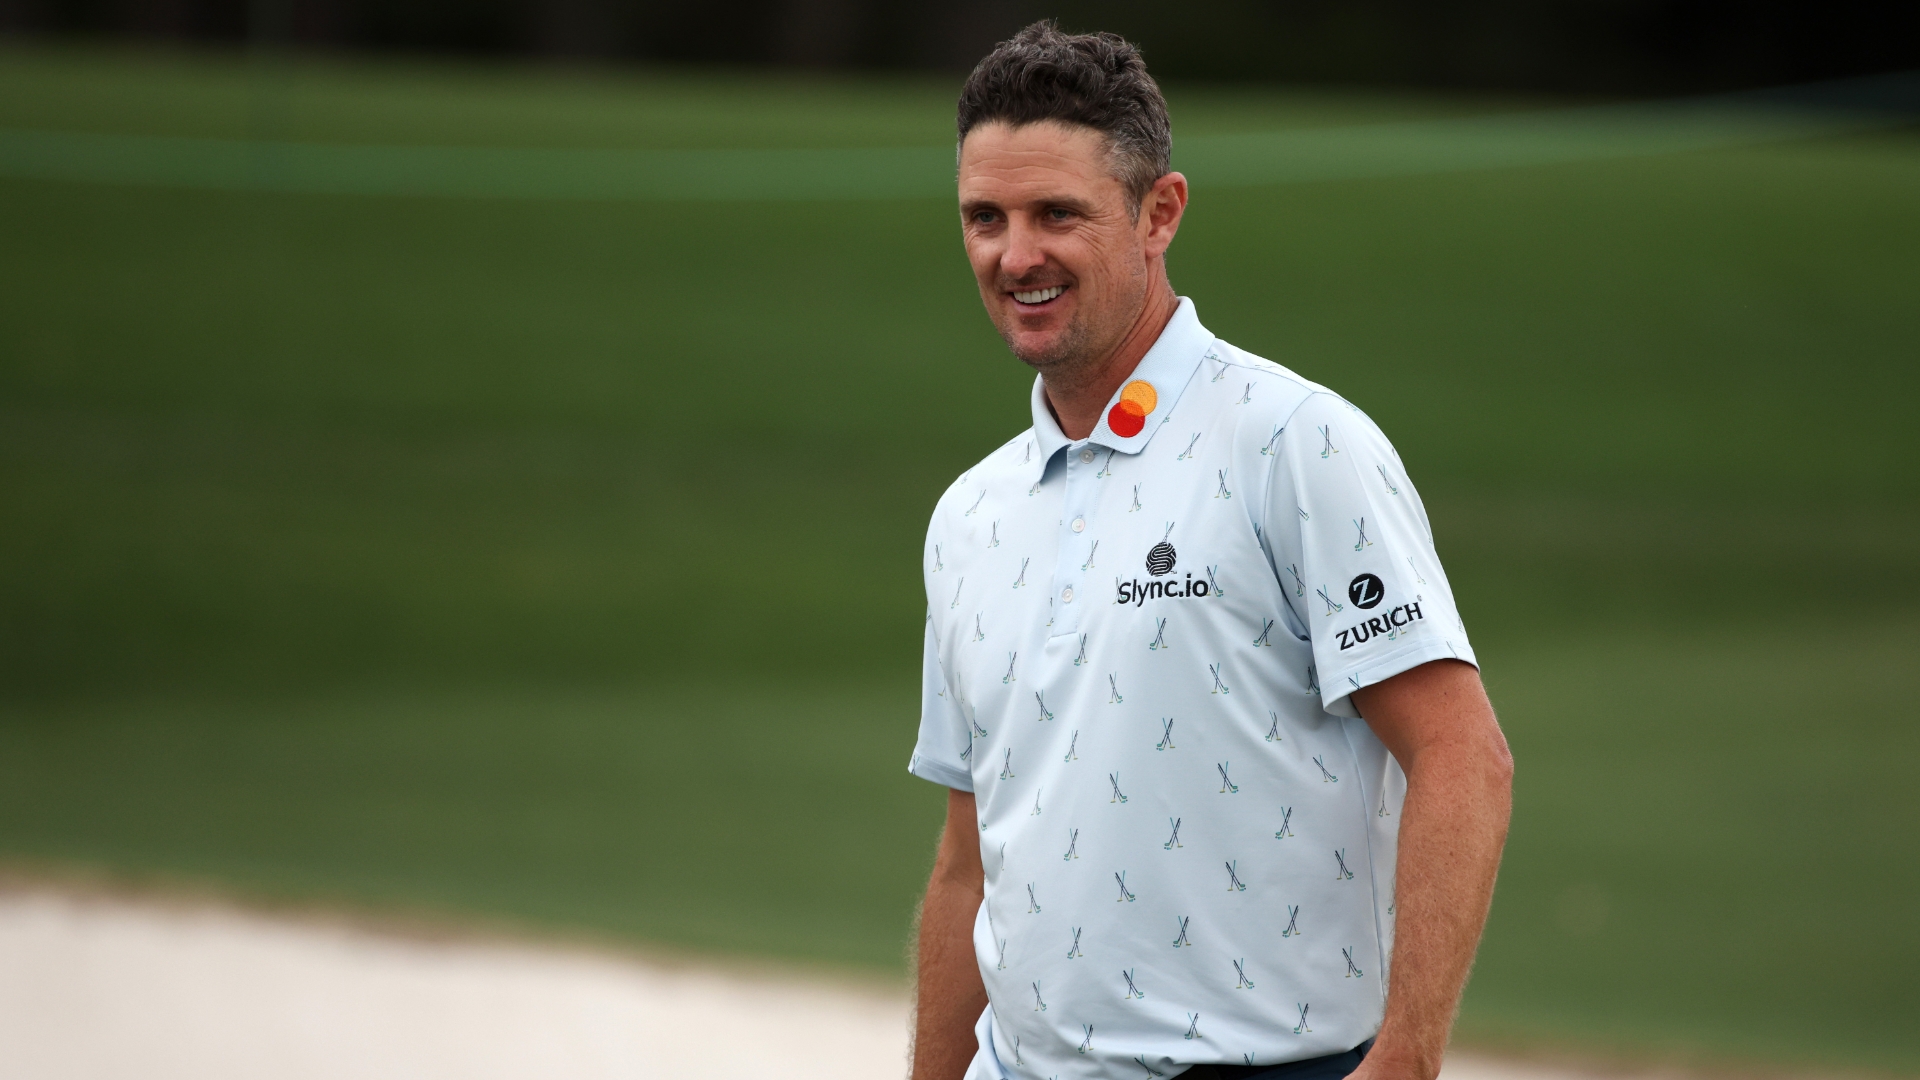 Justin Rose shoots 65, leads by 4 strokes after Round 1